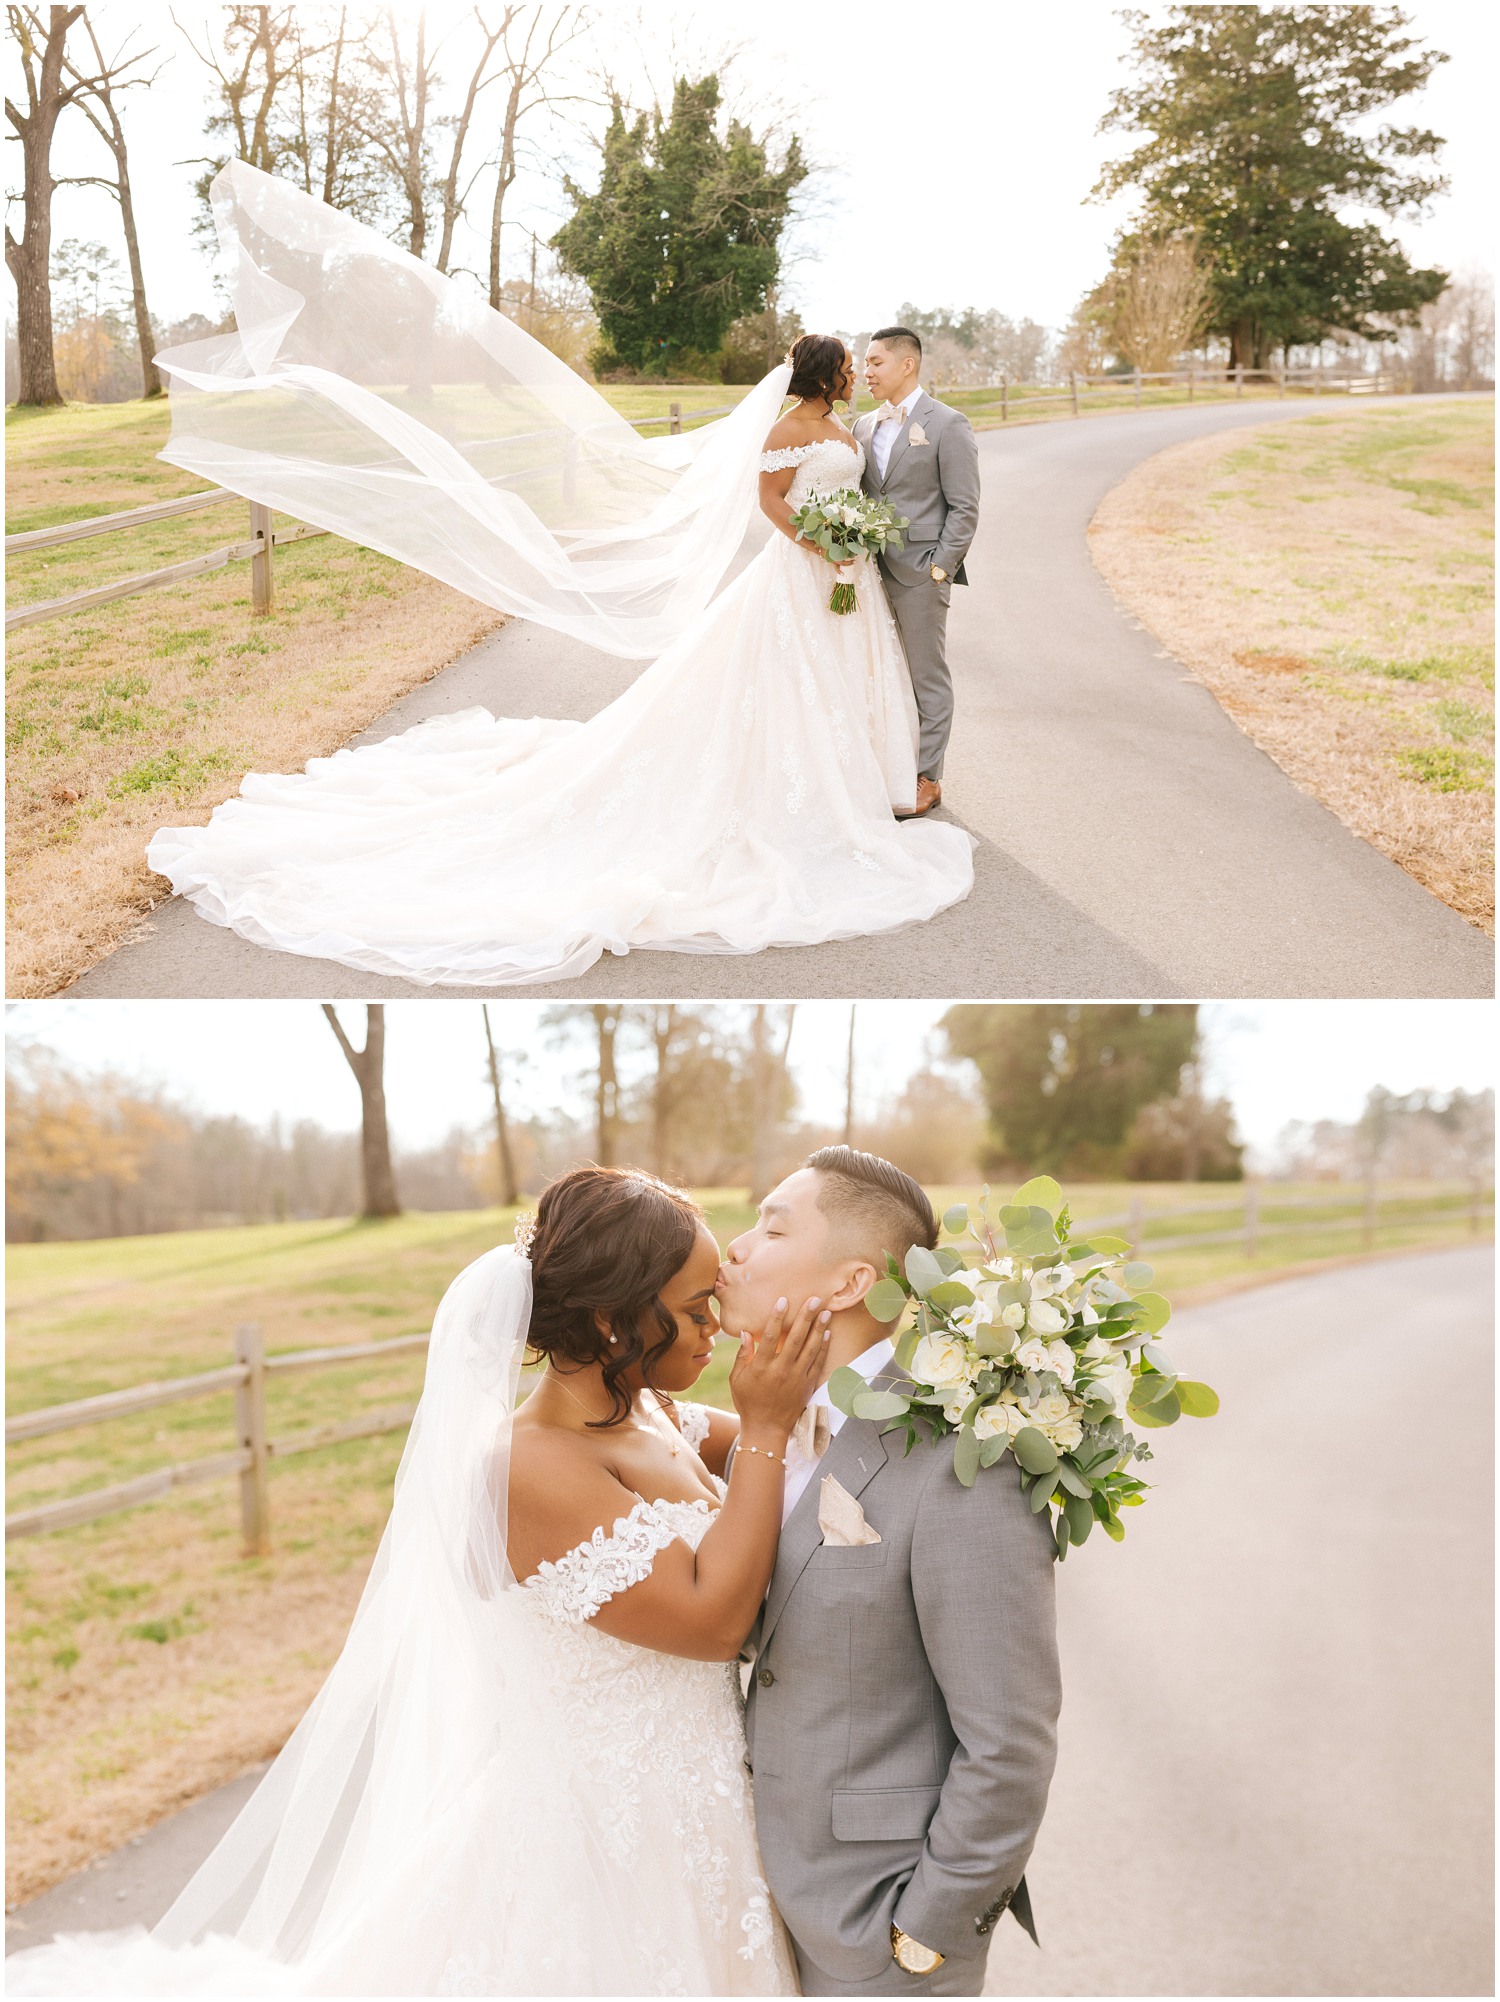 Veil flying in the wind during couples portraits at Raleigh Wedding in North Carolina.